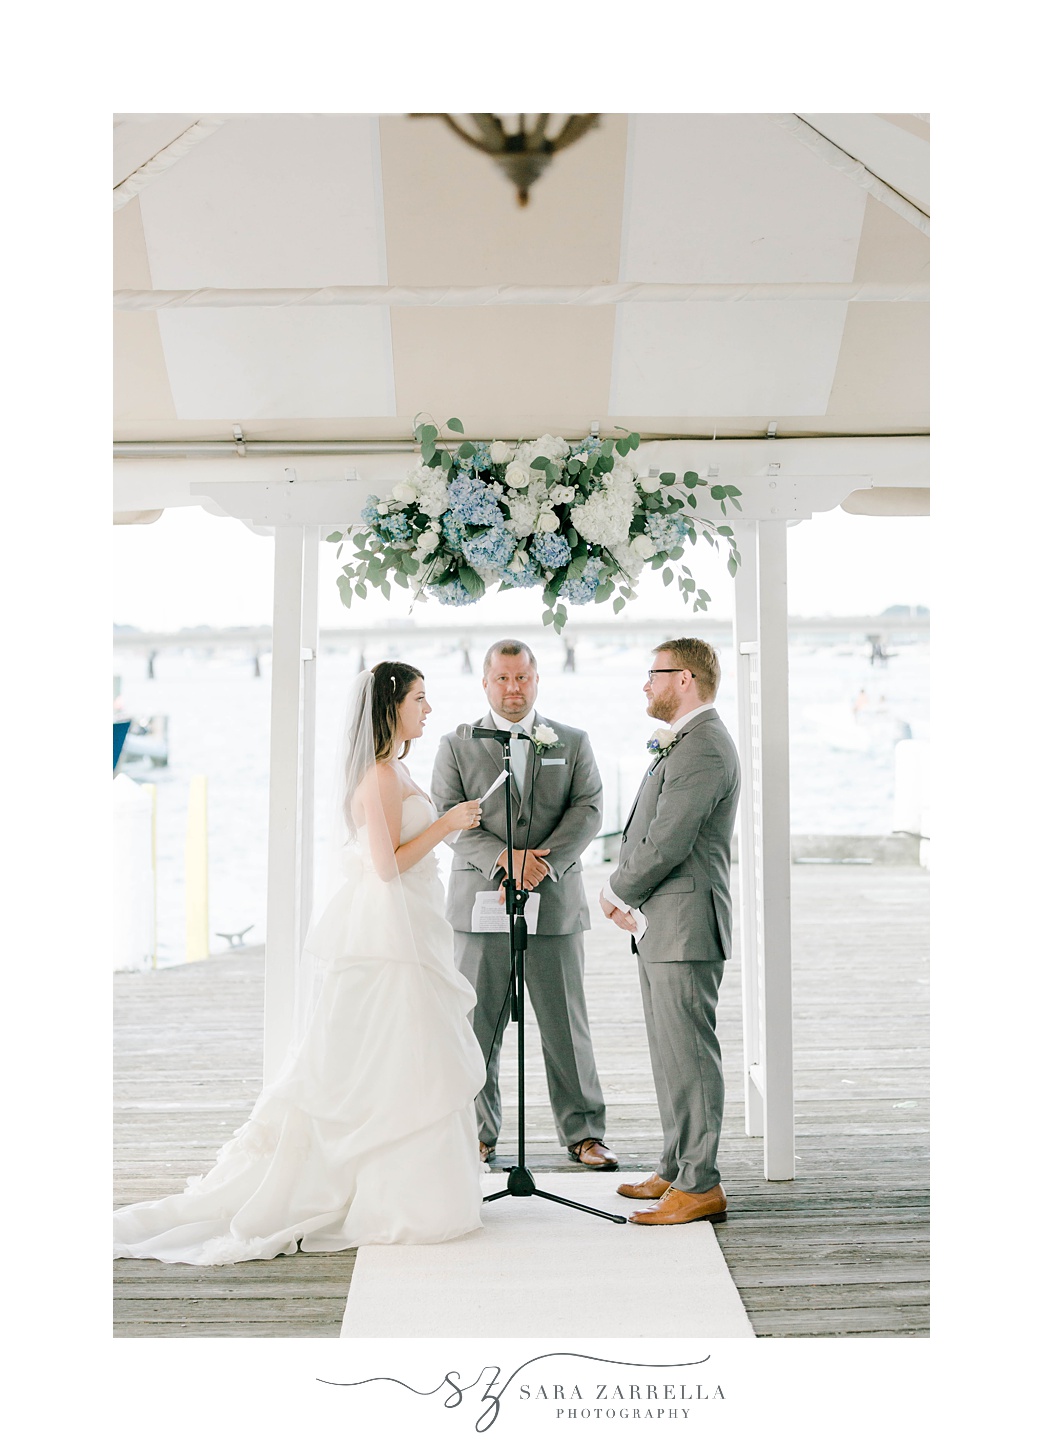 couple exchanges vows during Regatta Place wedding ceremony